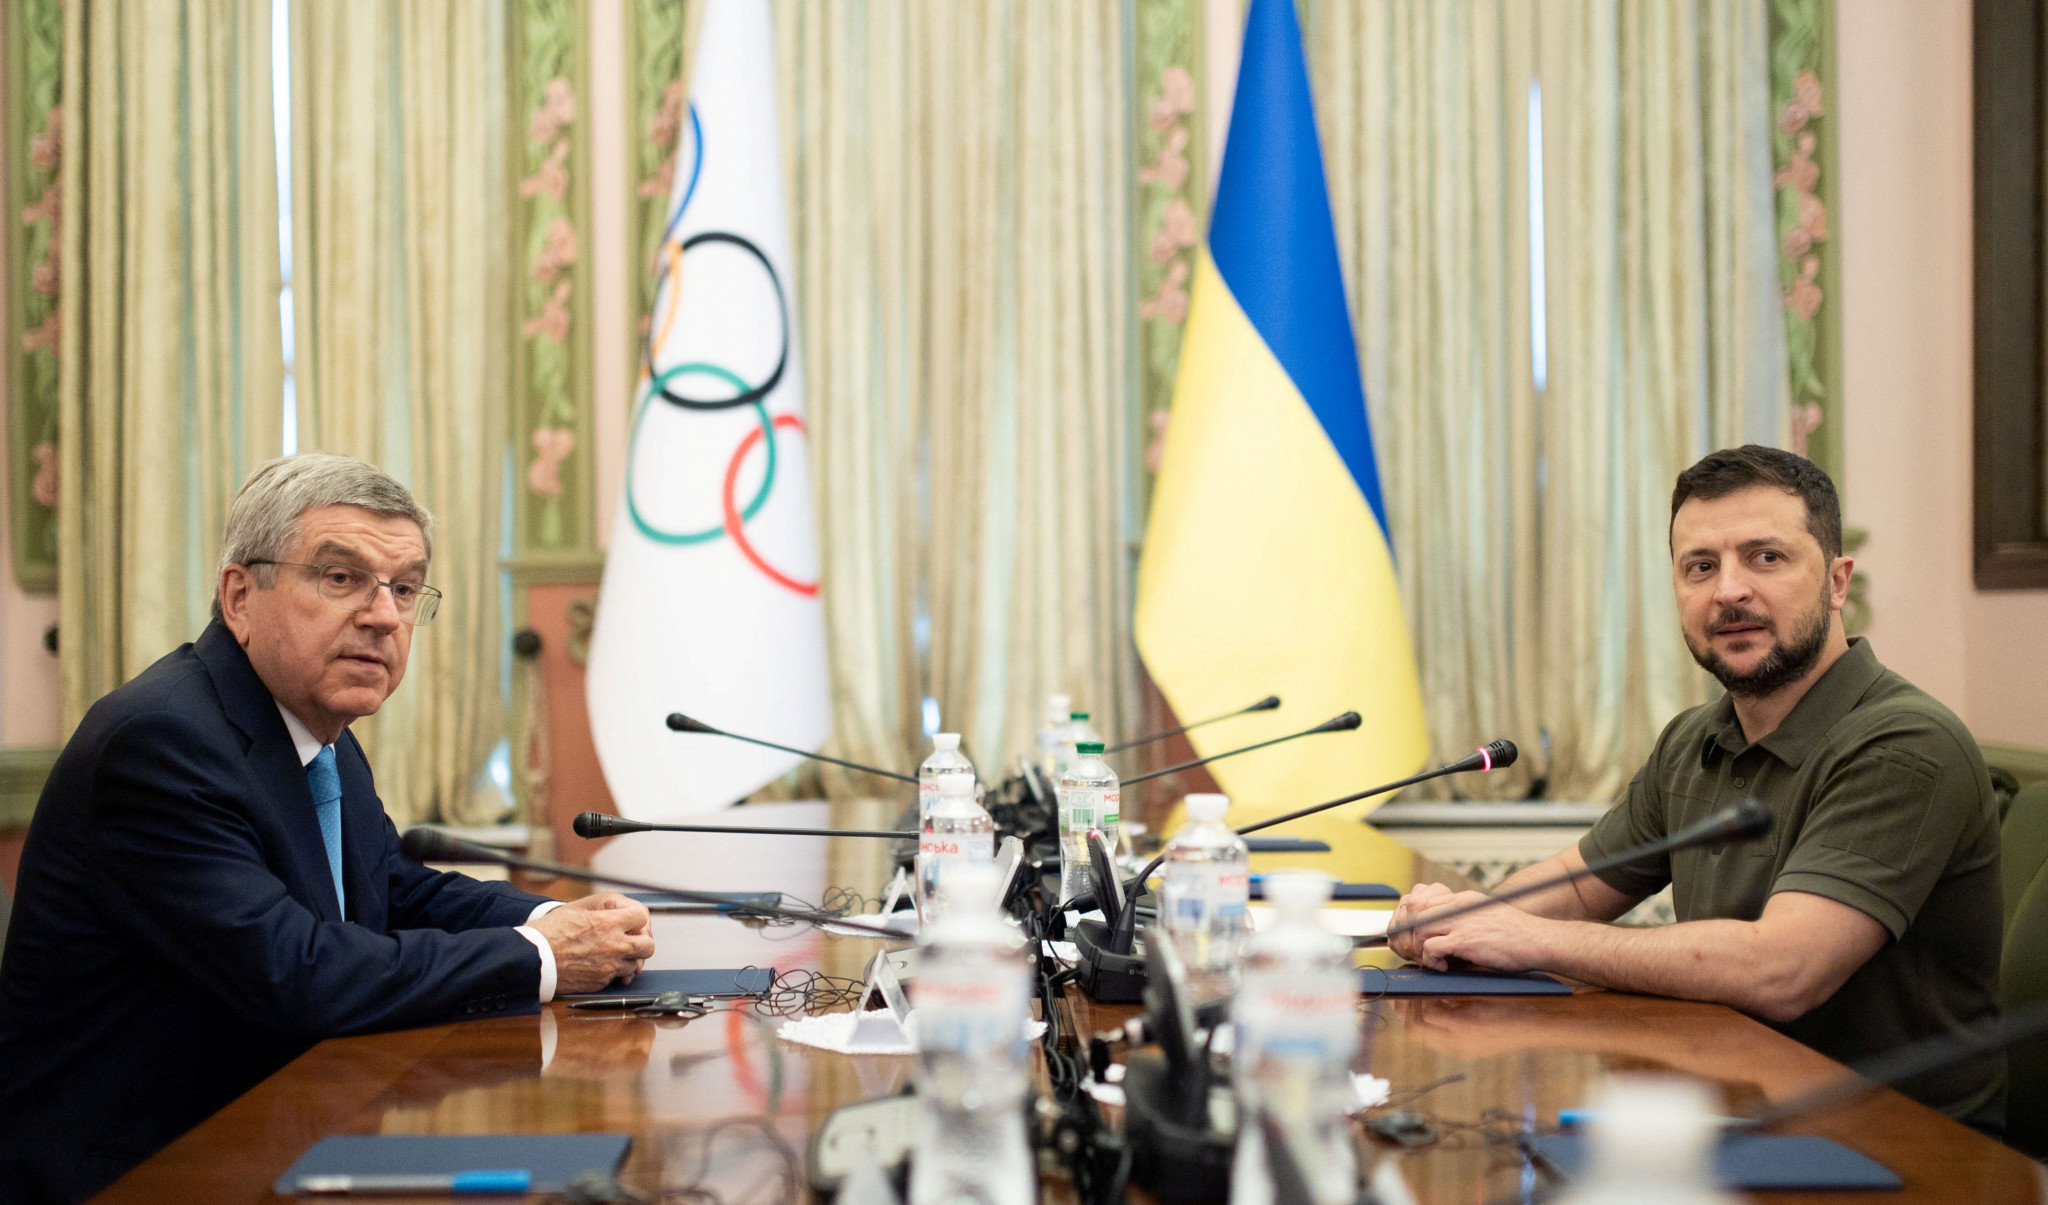 IOC President Thomas Bach, pictured left alongside Ukraine President Volodymyr Zelenskyy, is now backing the participation of Russian and Belarusian athletes at Paris 2024 as 